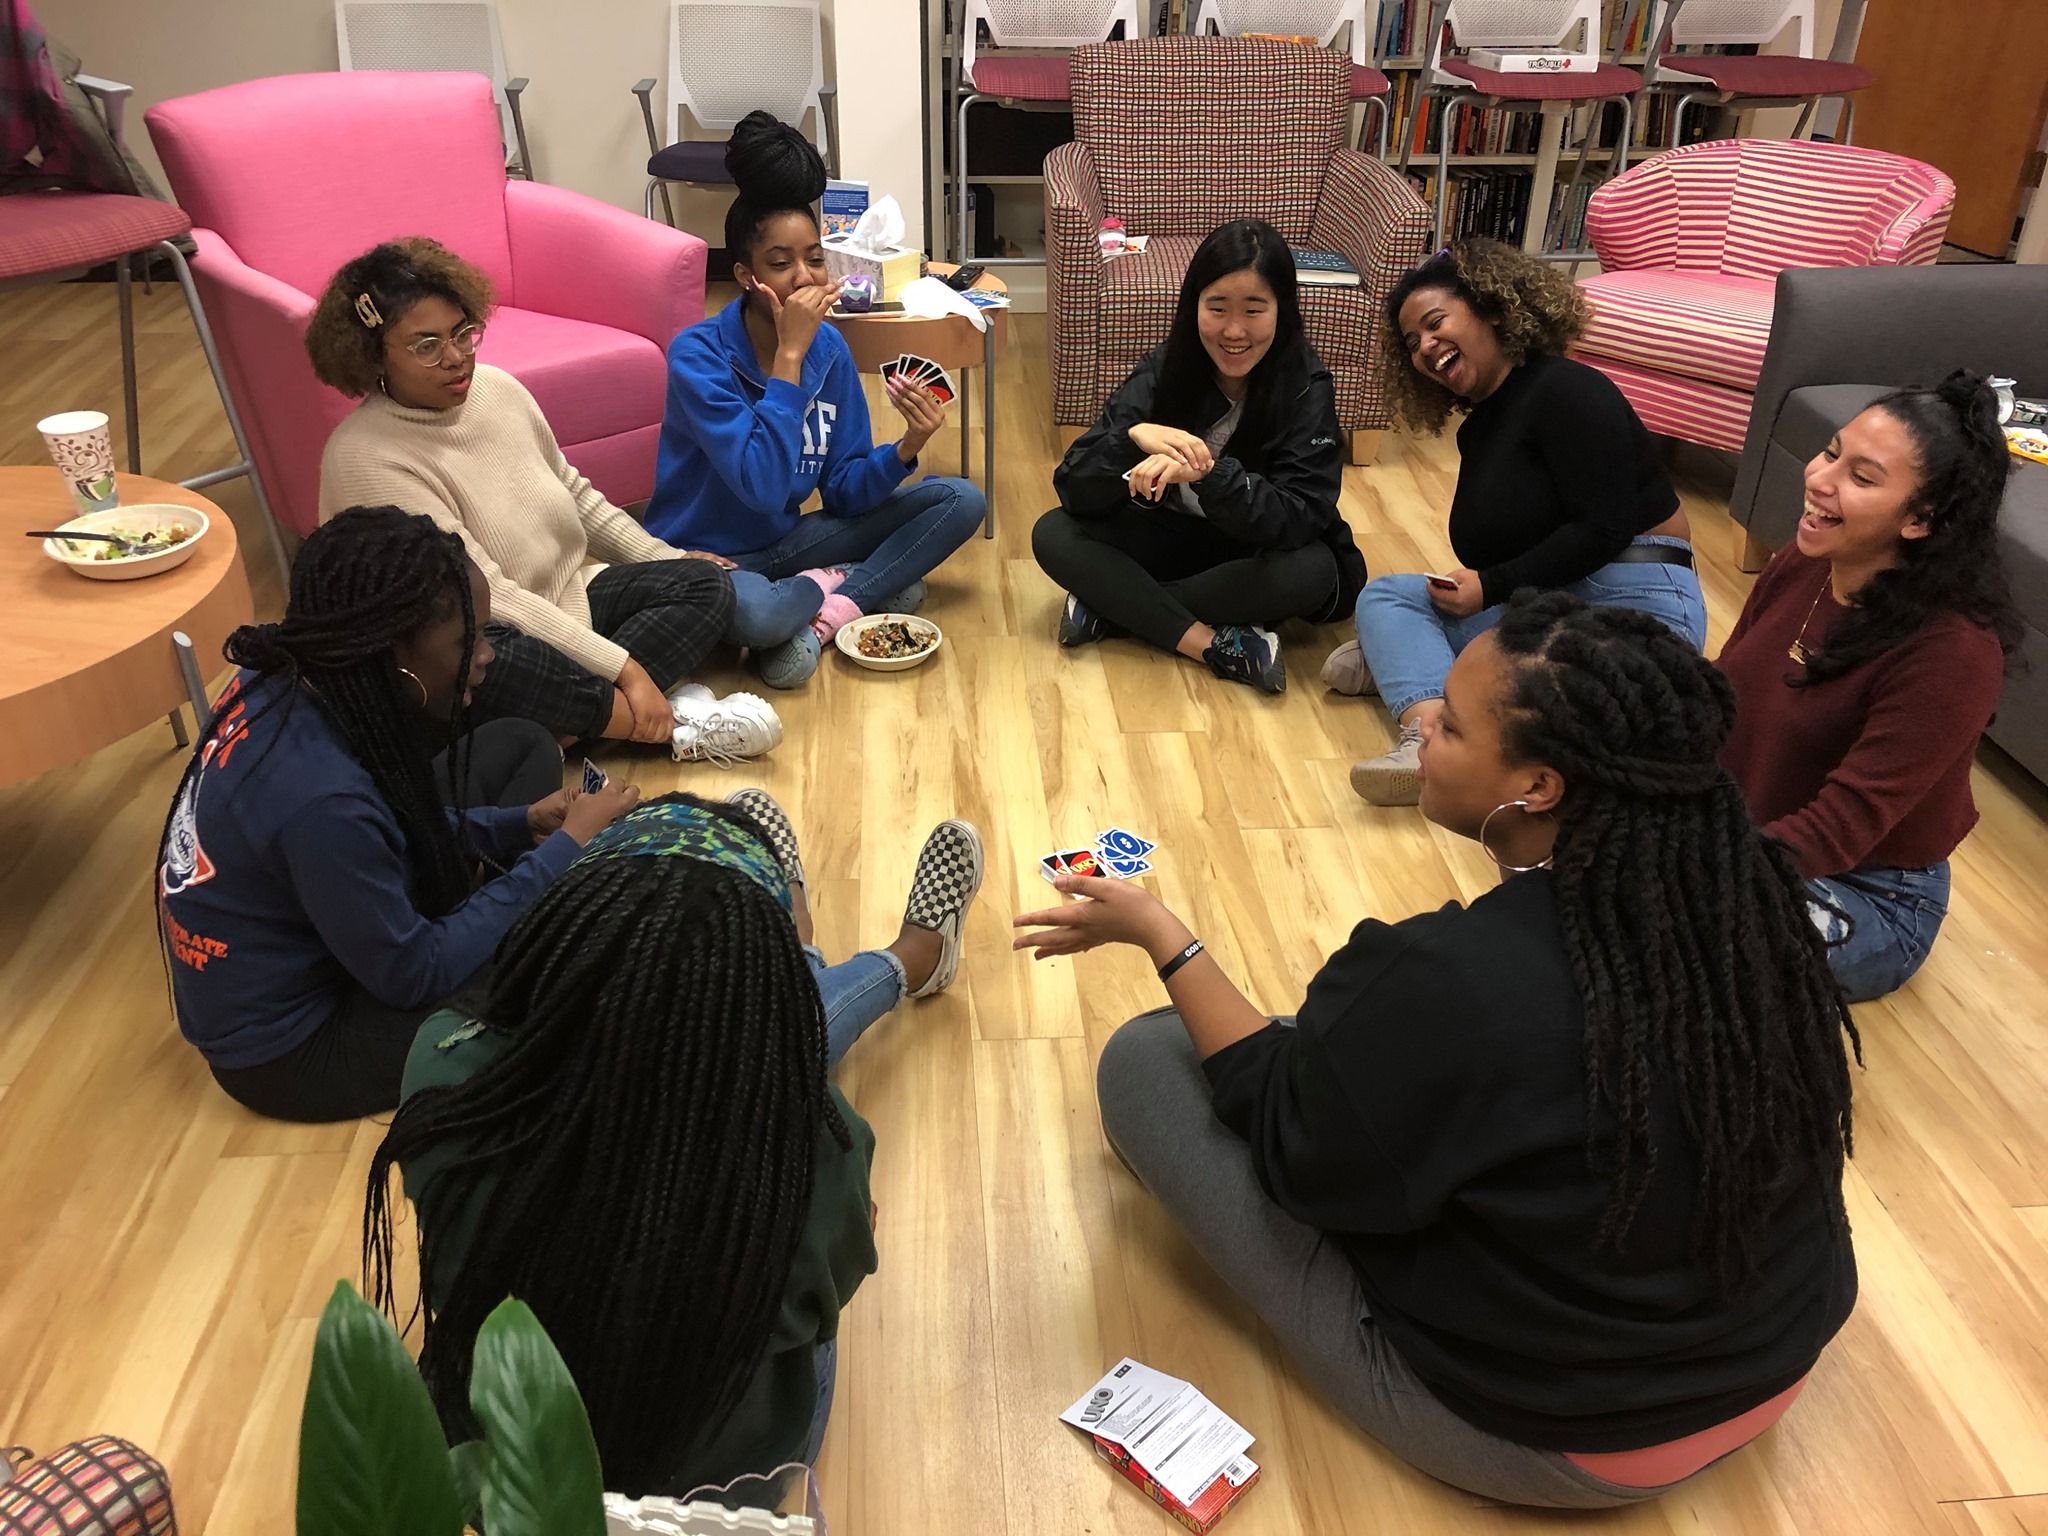 a group of women/femme-identified folks of medium to dark skin tones sit in a circle on a light wooden floor playing a card game while laughing and smiling jovially